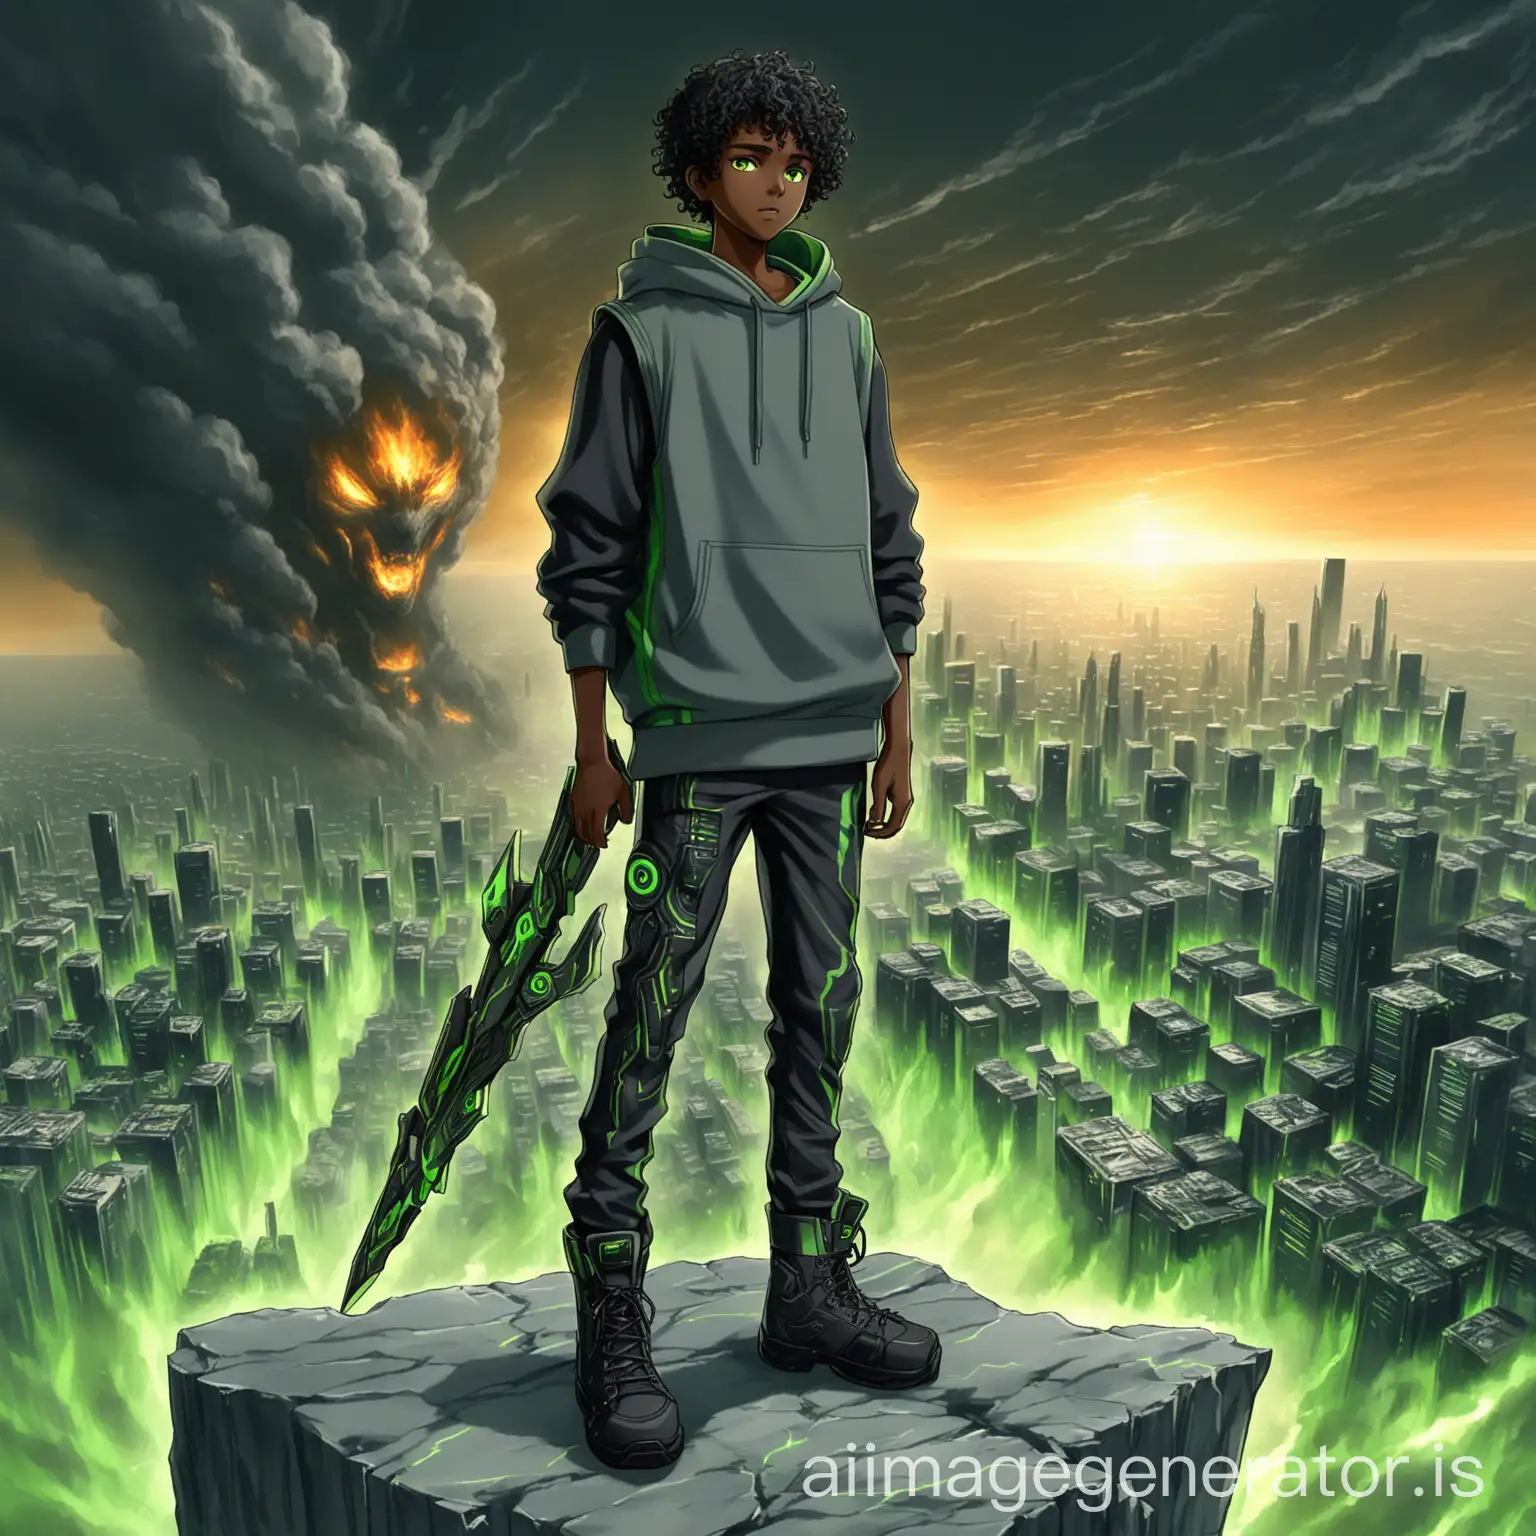 Futuristic-African-Teen-Warrior-Stands-on-Cliff-Amid-Burning-City